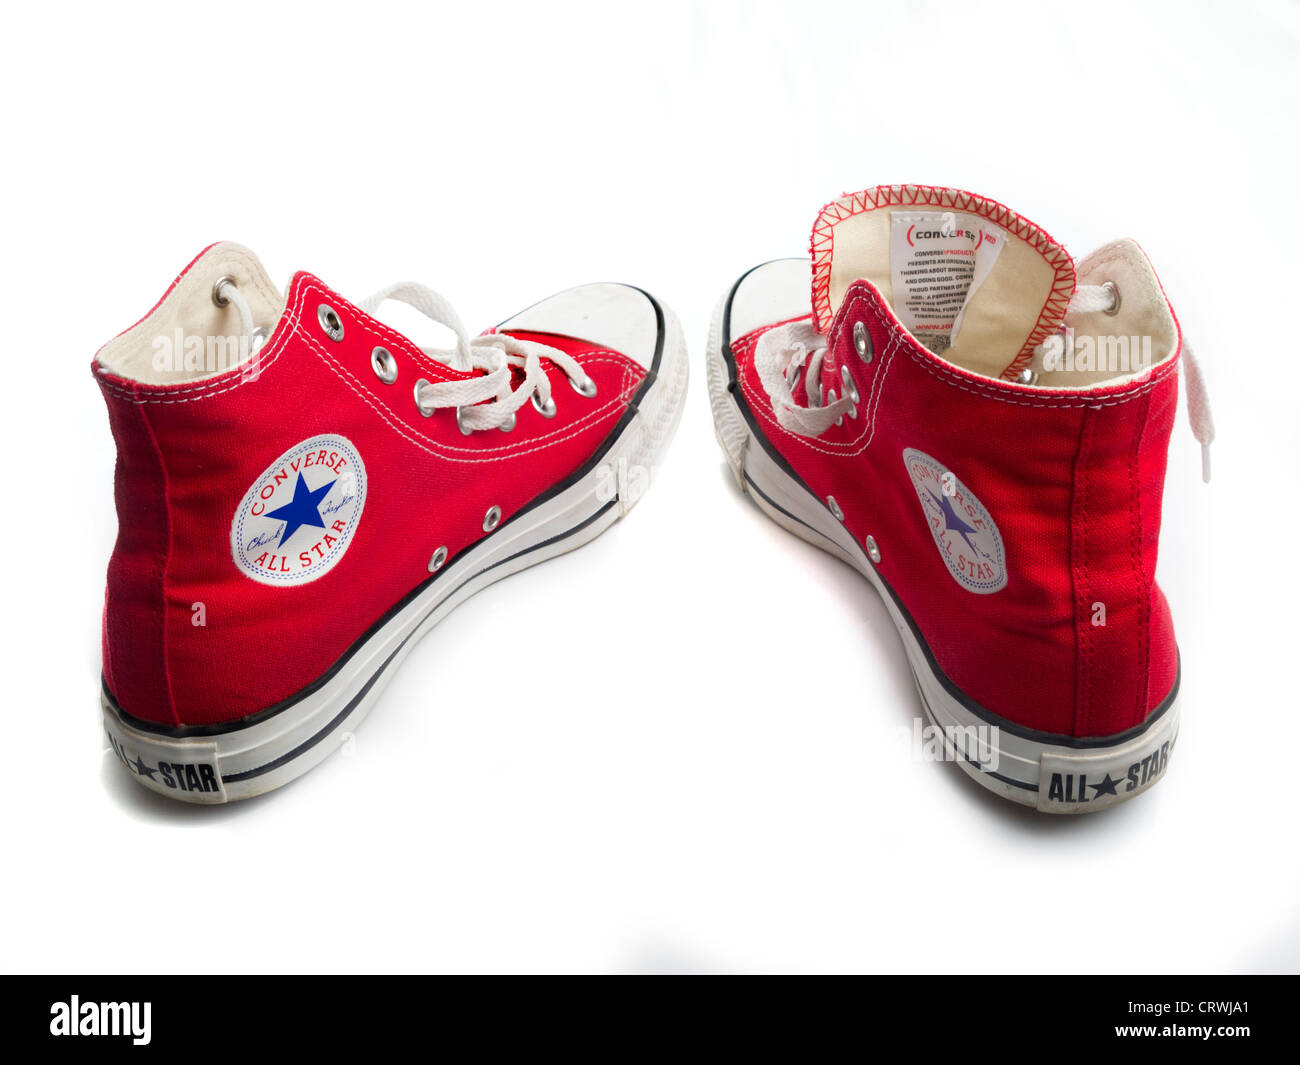 Red Converse Chuck Taylor All Star shoe pair Stock Photo - Alamy